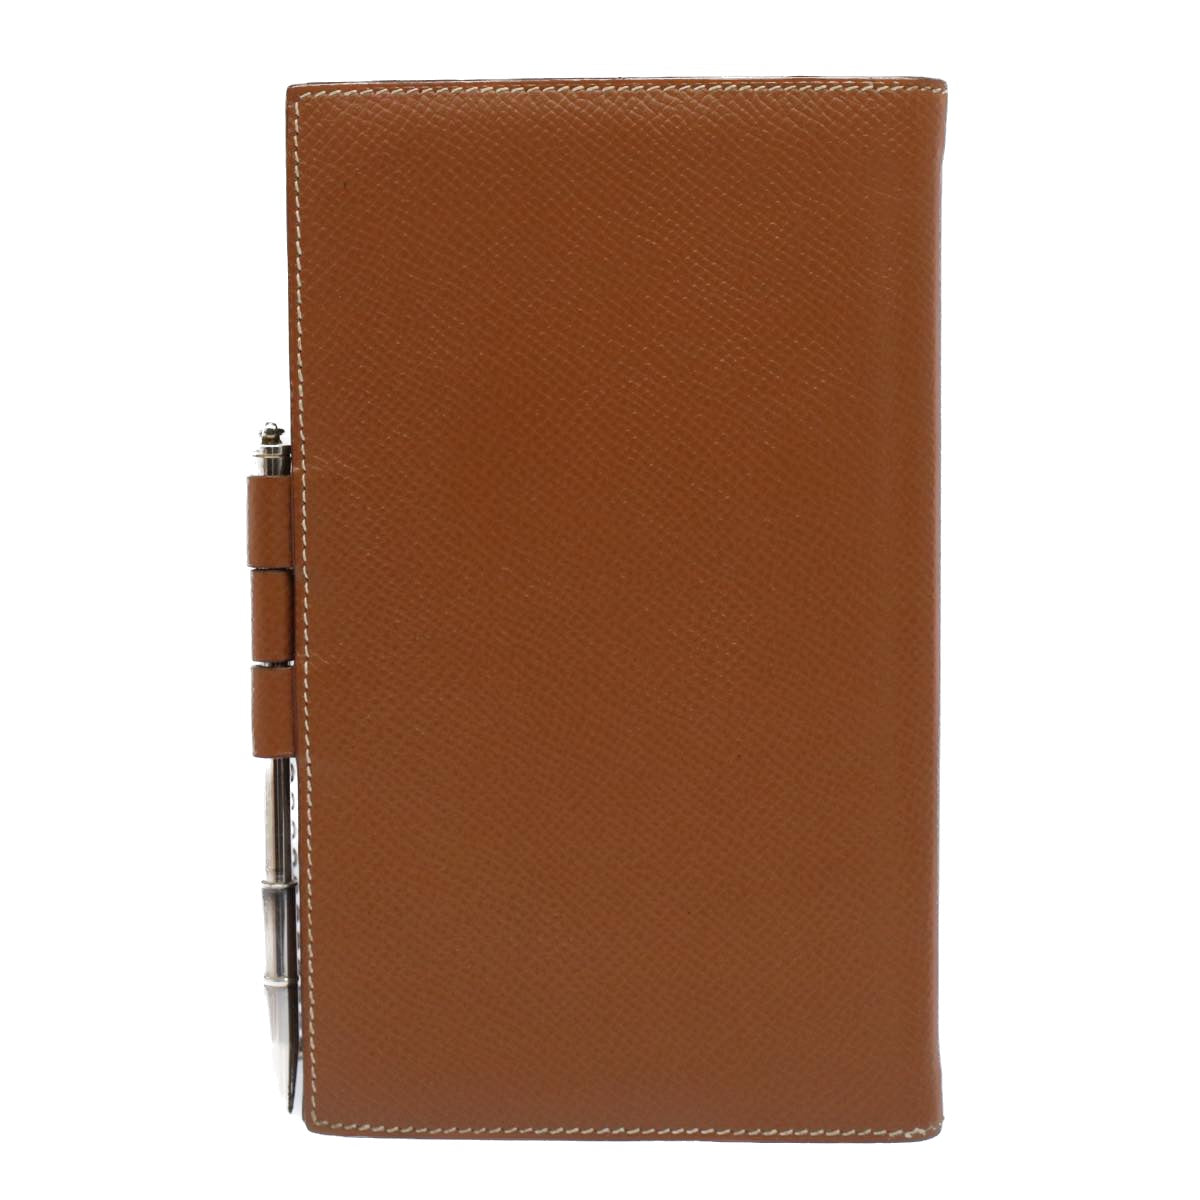 HERMES Ajanda Vijo Day Planner Cover Leather Brown Auth ac2153 - 0